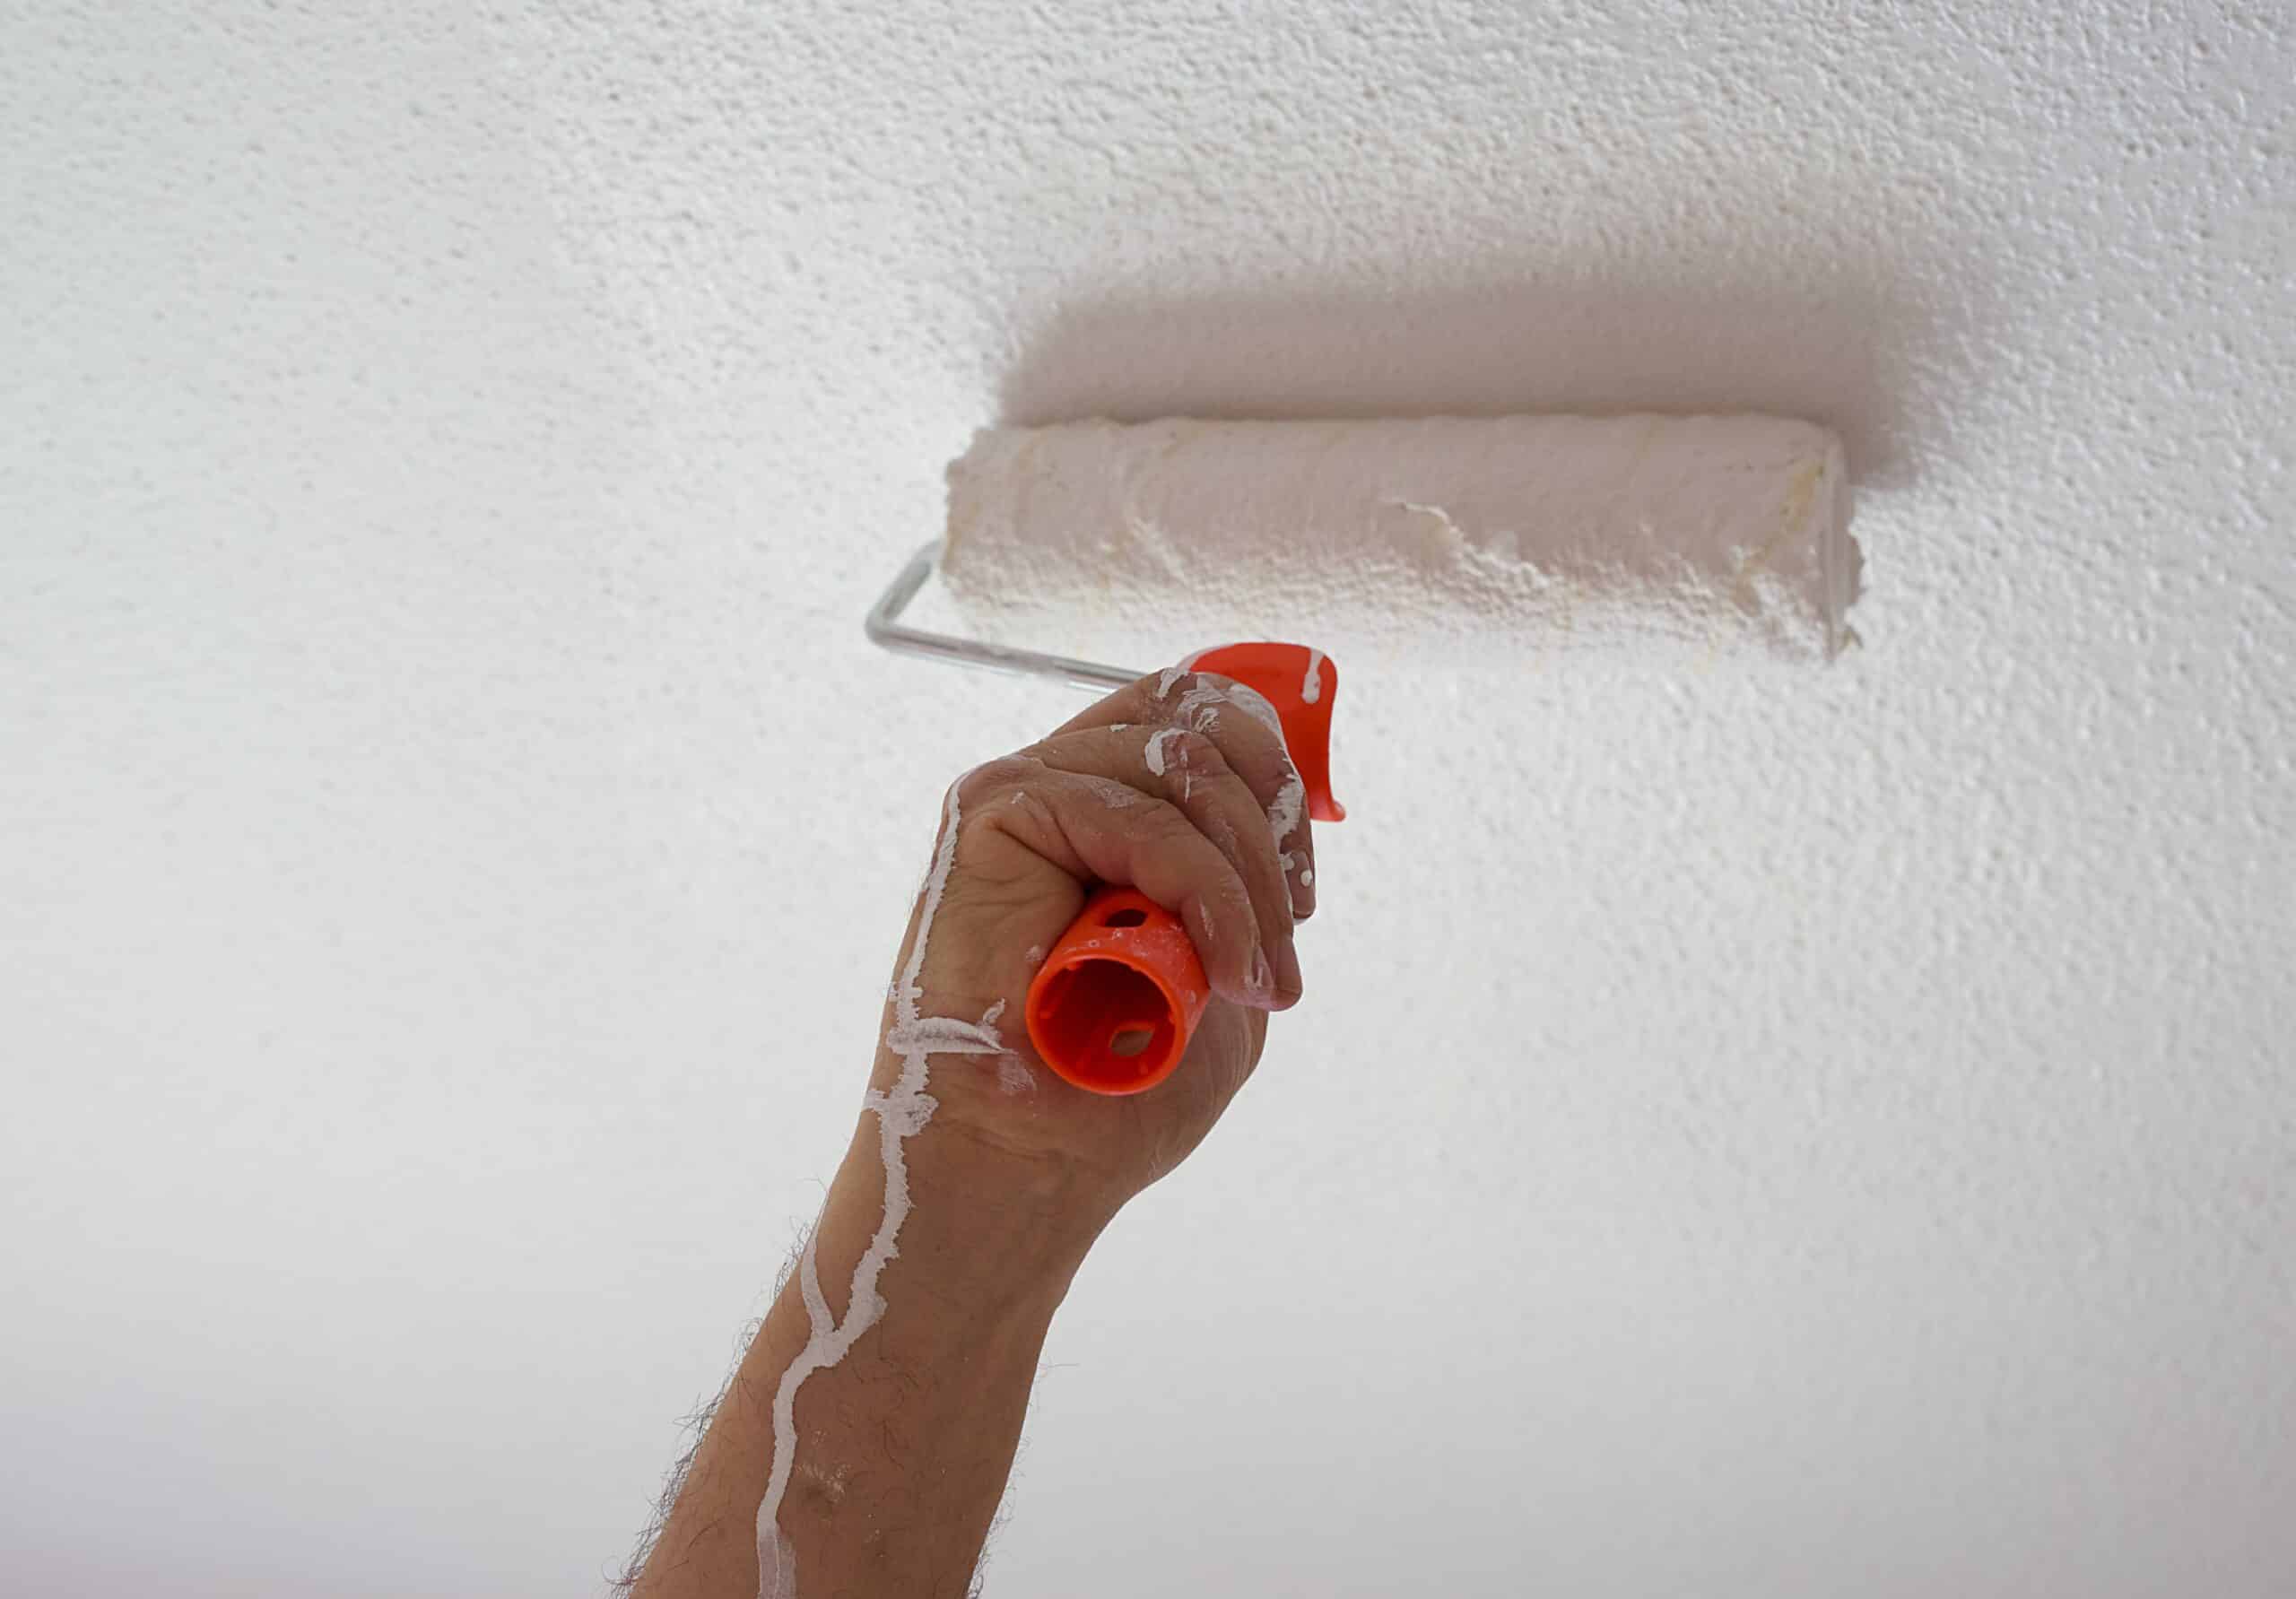 How To Paint A Popcorn Ceiling: 5 Steps To A Beautiful Finish